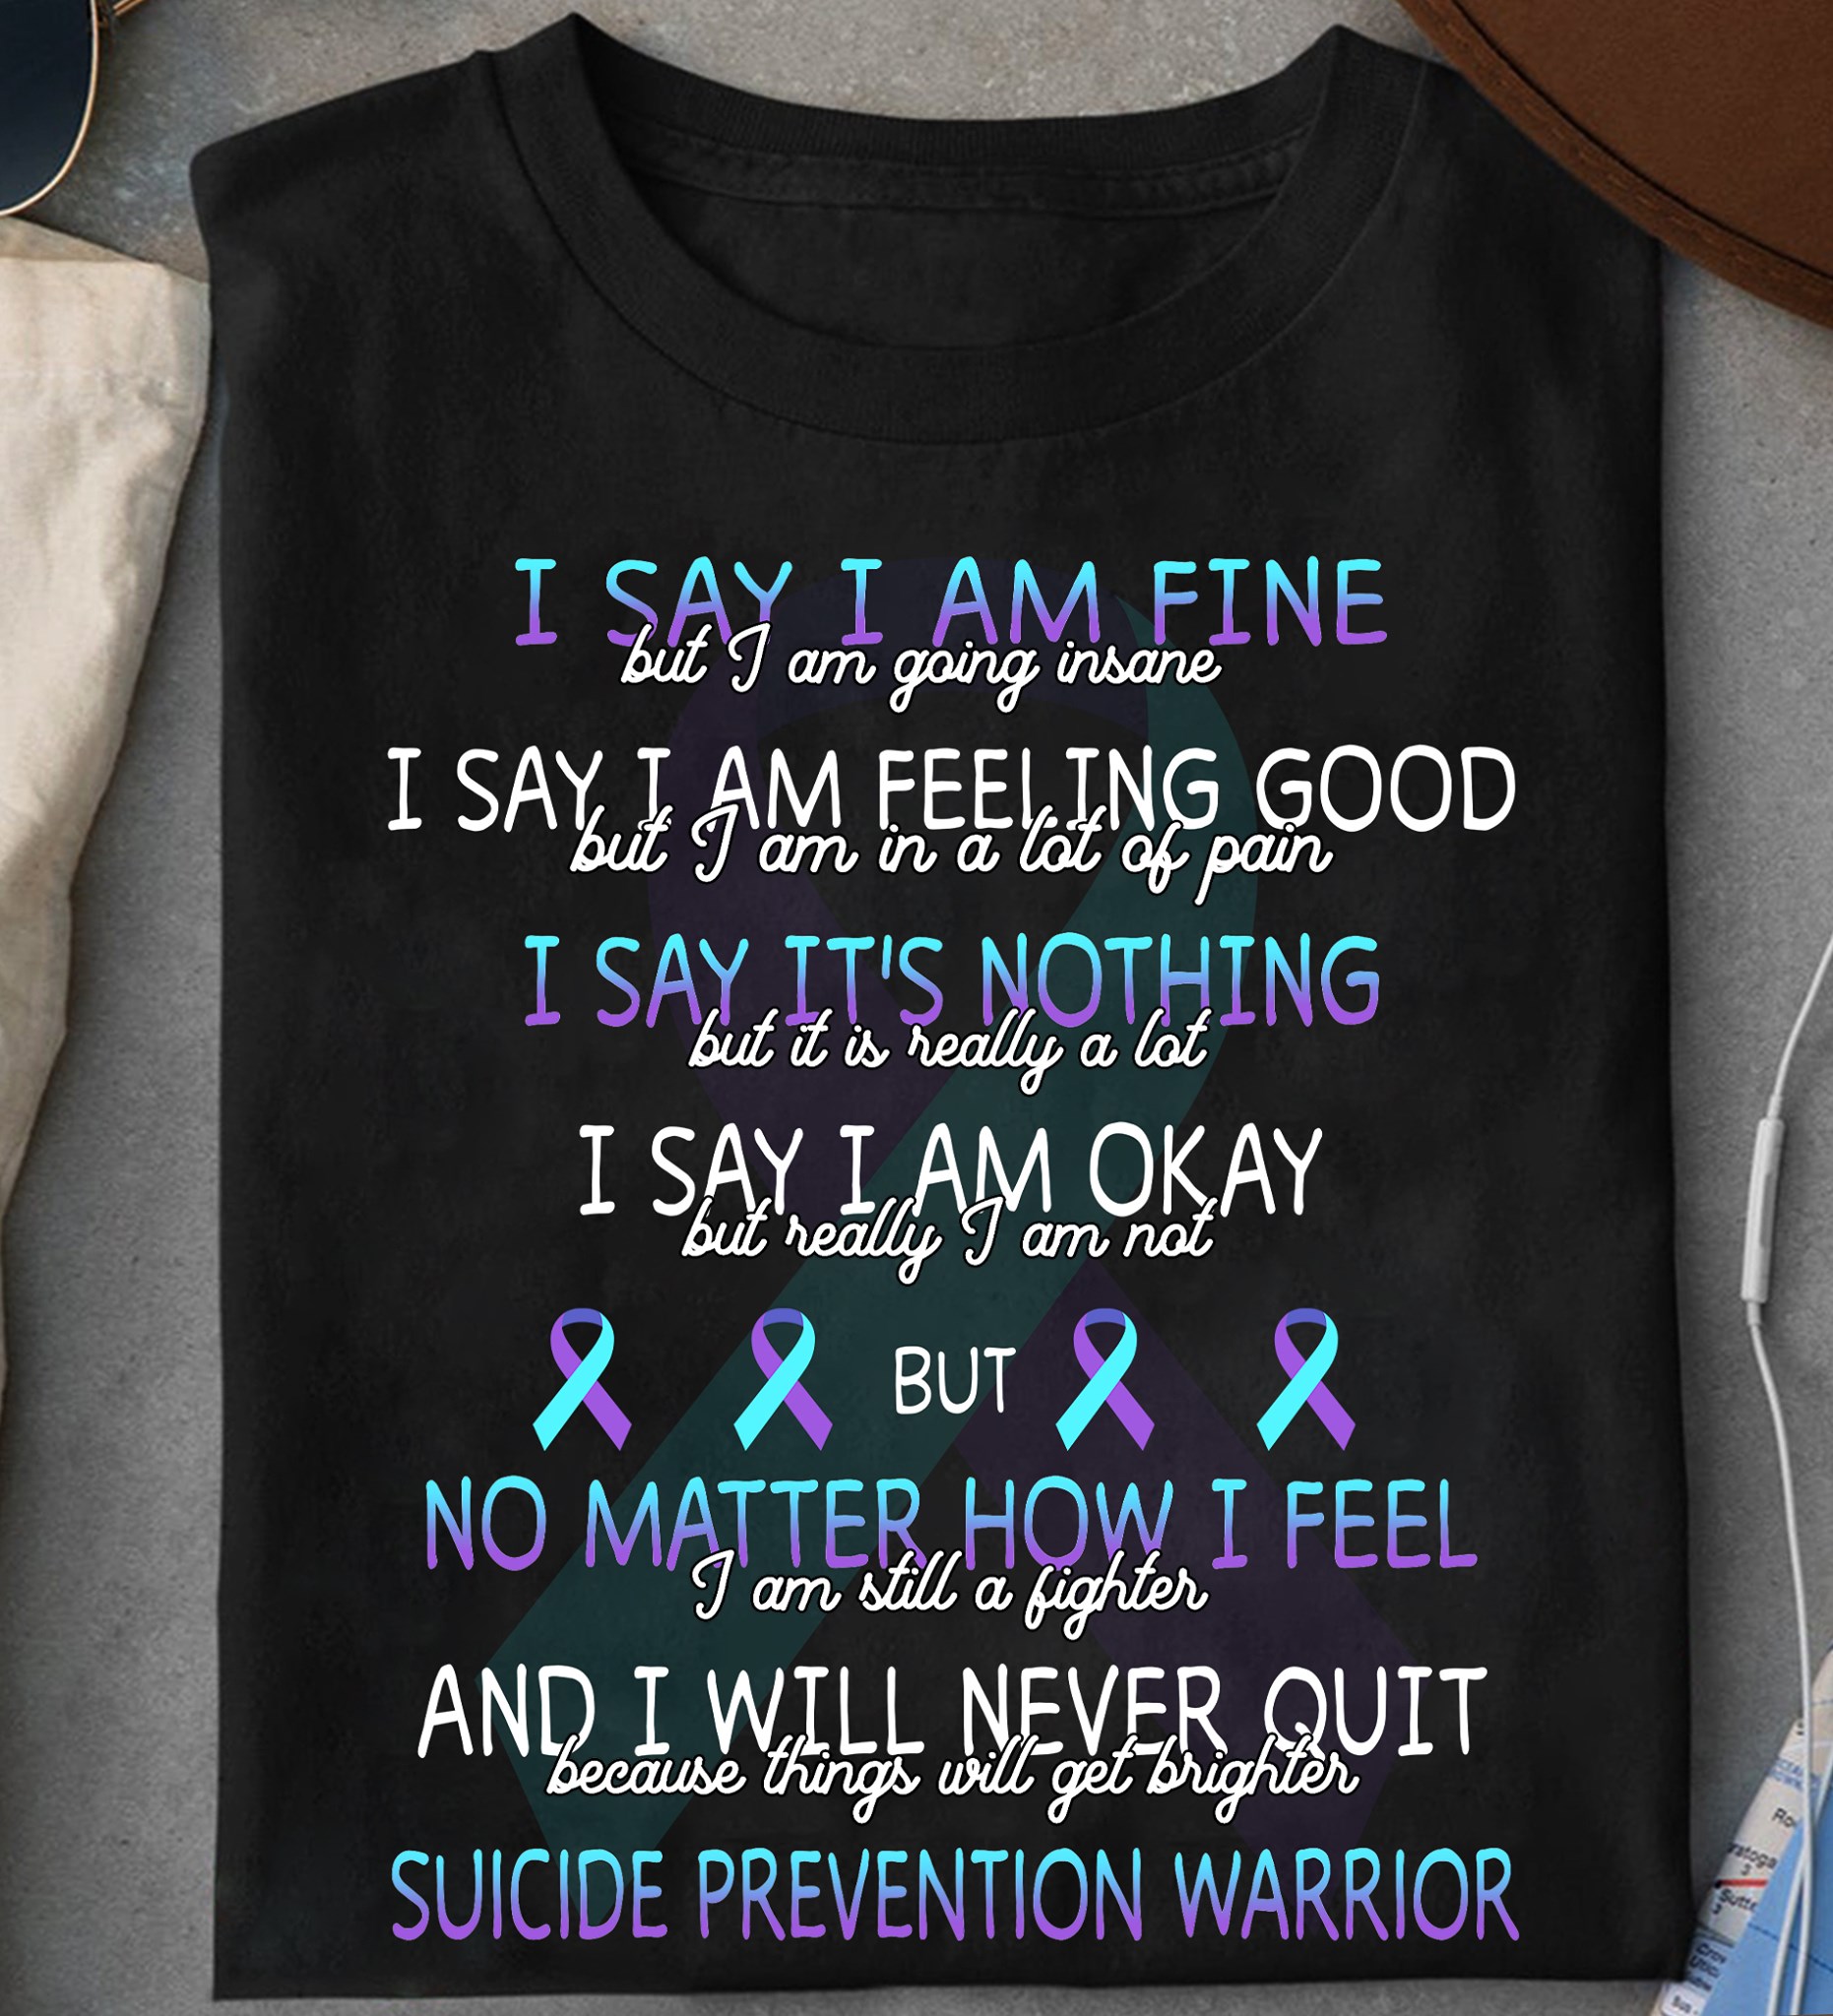 I say I am fine but I am going insane I say I am feeling good but I am in a lot of pain - Suicide prevention warrior